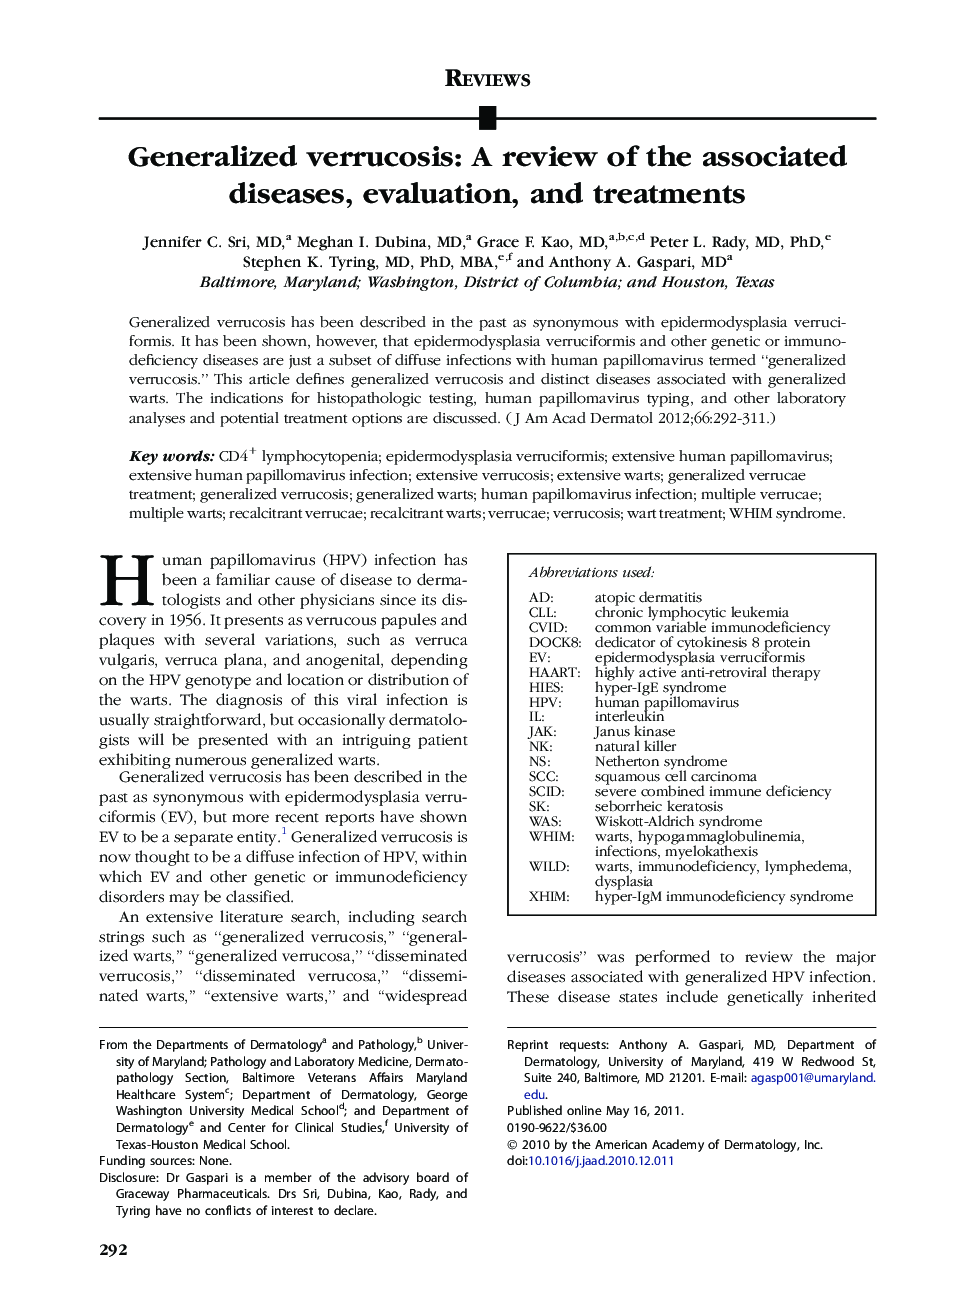 Generalized verrucosis: AÂ review of the associated diseases, evaluation, and treatments